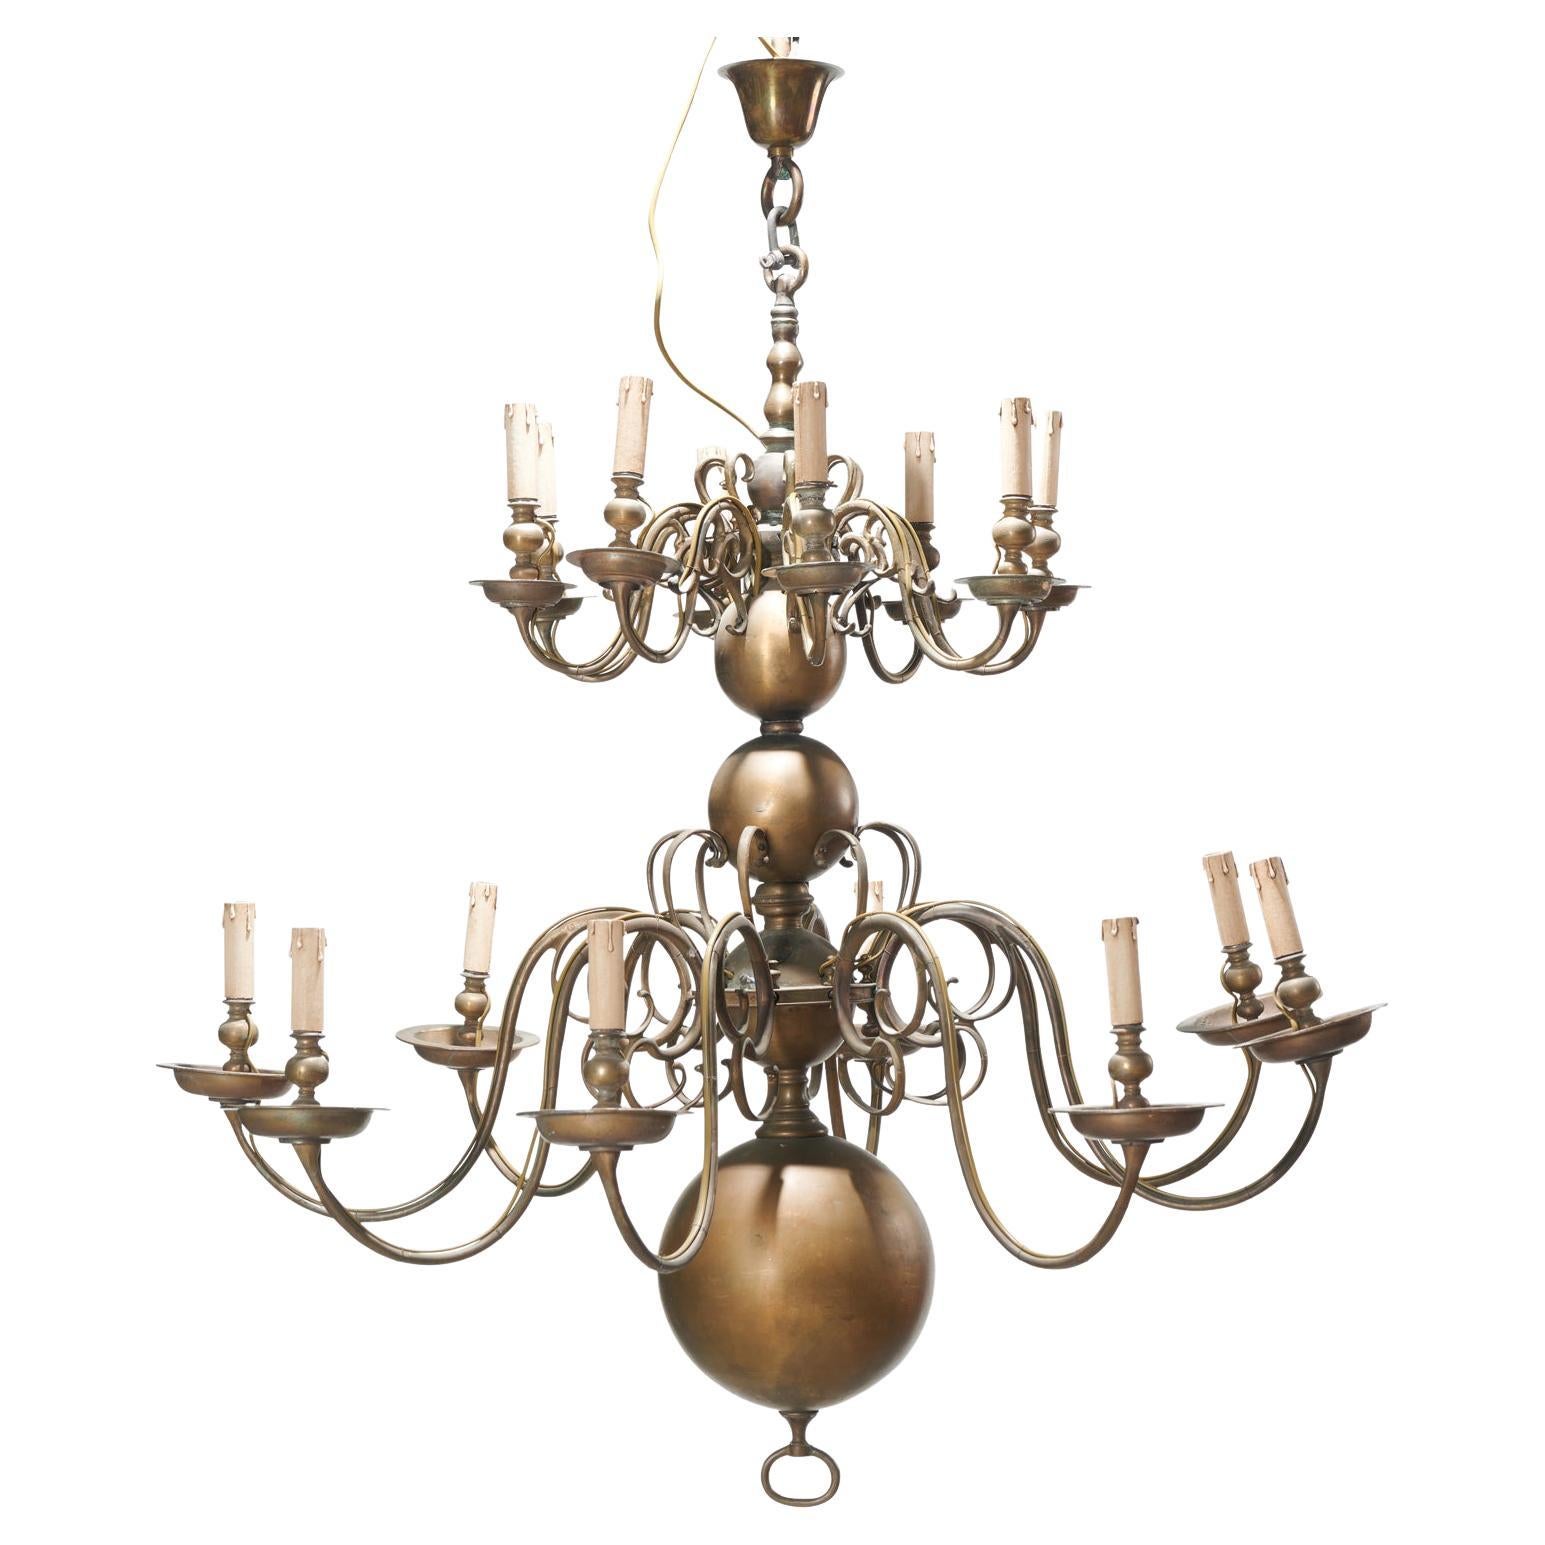 A Late 19th Century Antique Dutch Brass Chandelier For Sale